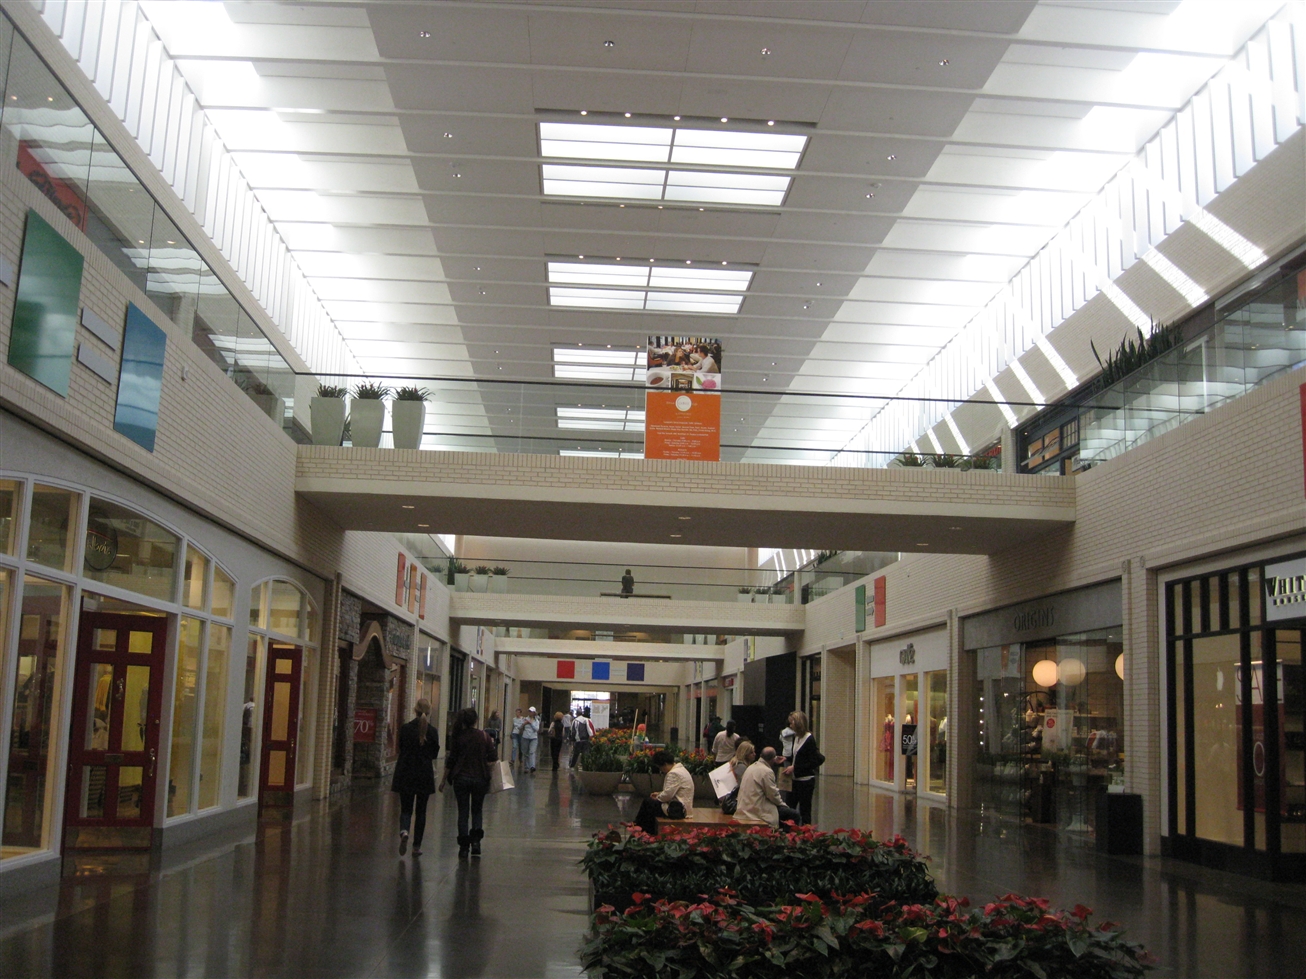 Malls with sales over 1 billion.